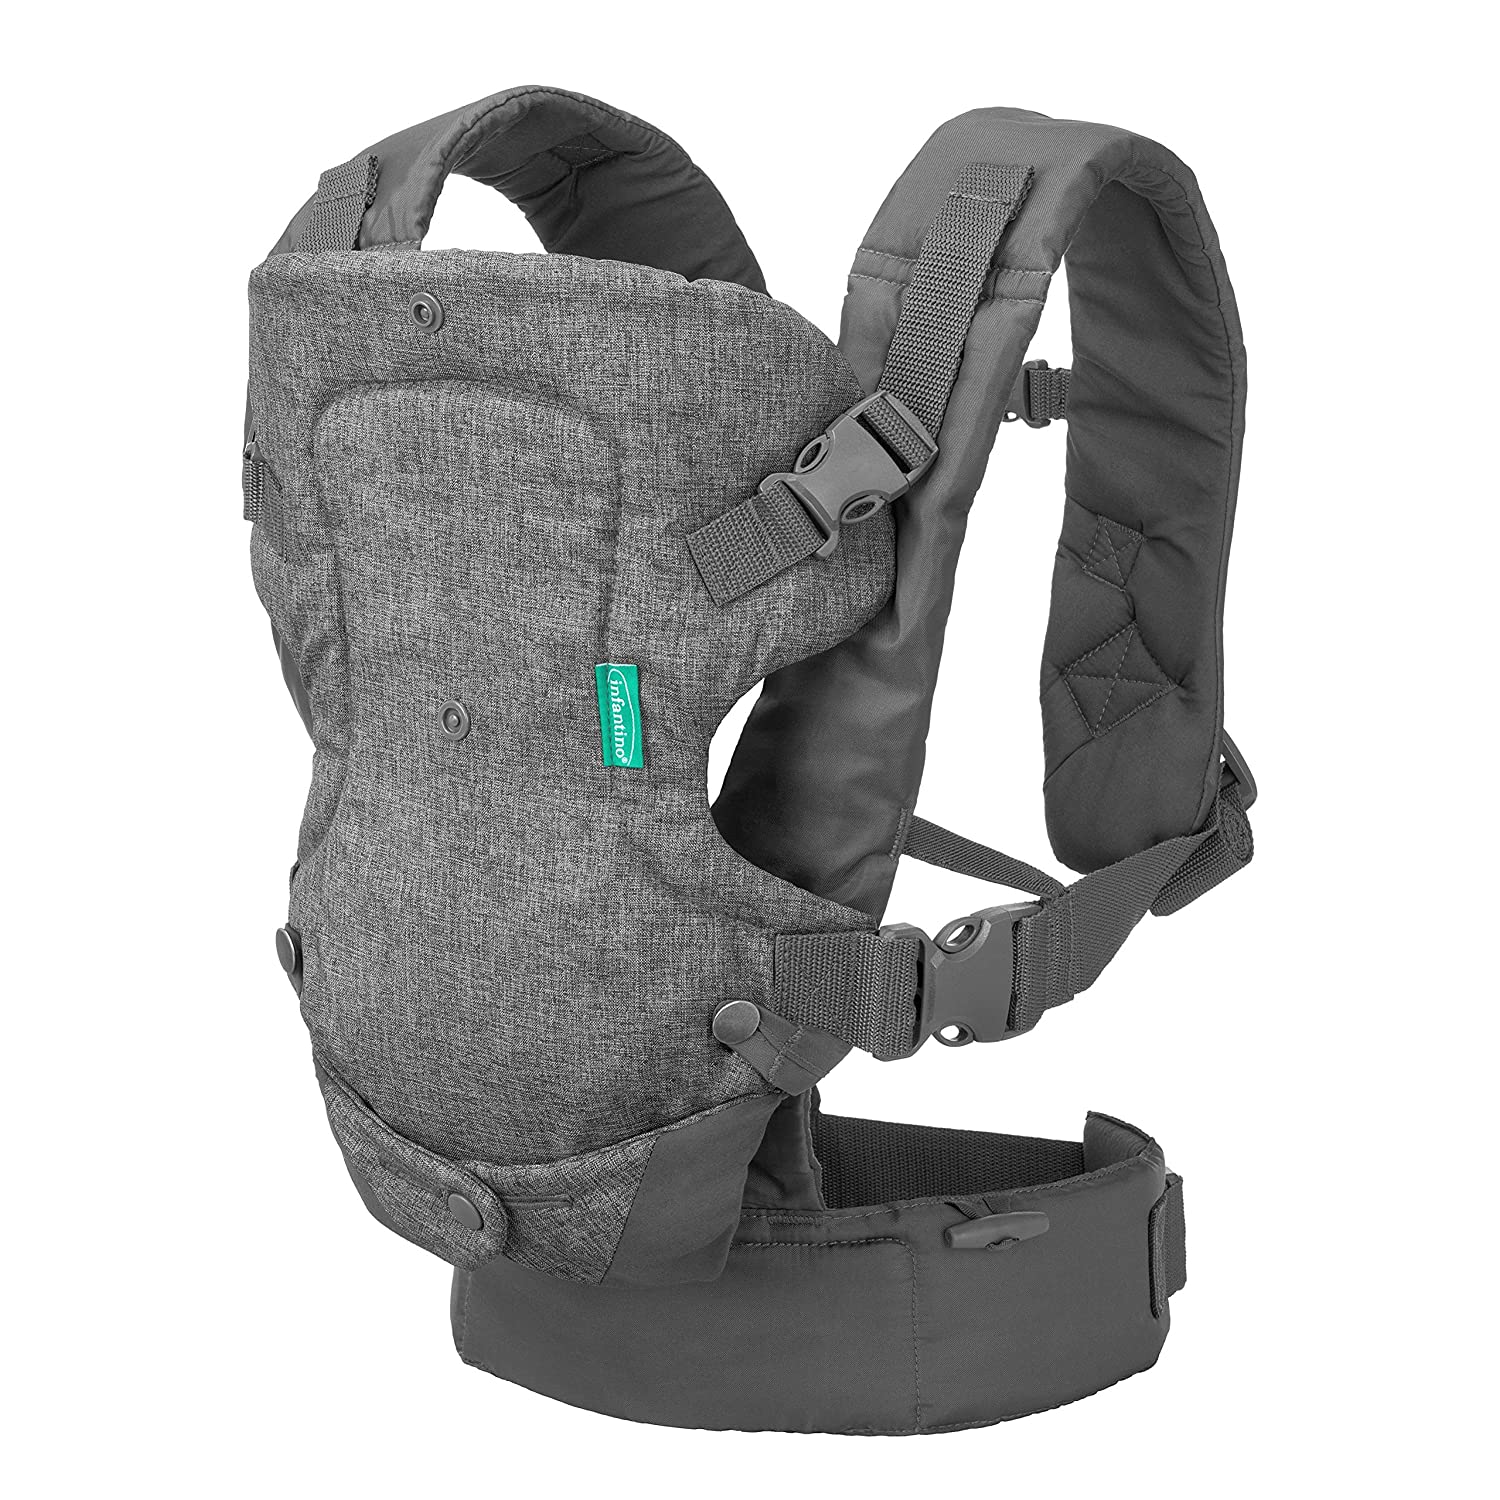 Infantino 4-in-1 Convertible Carrier - Grey